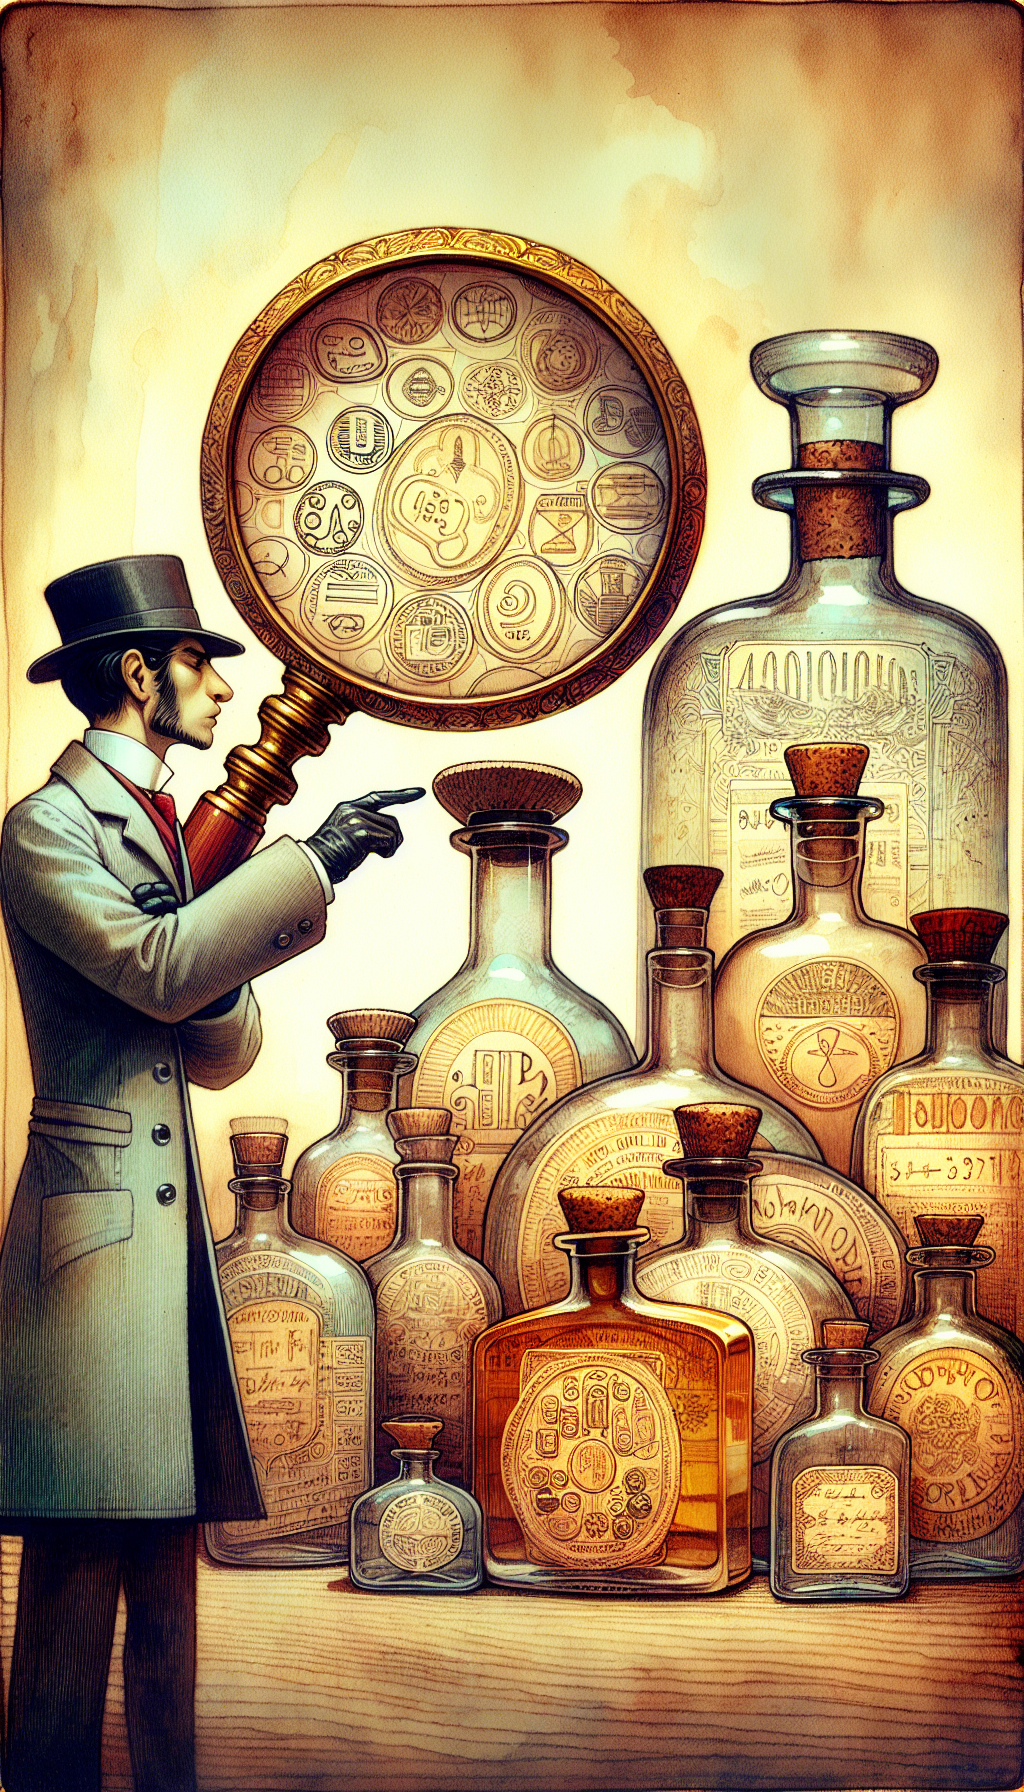 A whimsical magnifying glass looms over a cluster of transparent antique bottles, with their bottoms facing up, showcasing a tapestry of unique marks and symbols. A detective, garbed in vintage attire, examines the embossed clues with a curious expression, hinting at the mystery he's unraveling. The image is rendered in a juxtaposition of sepia tones and vibrant watercolor accents.